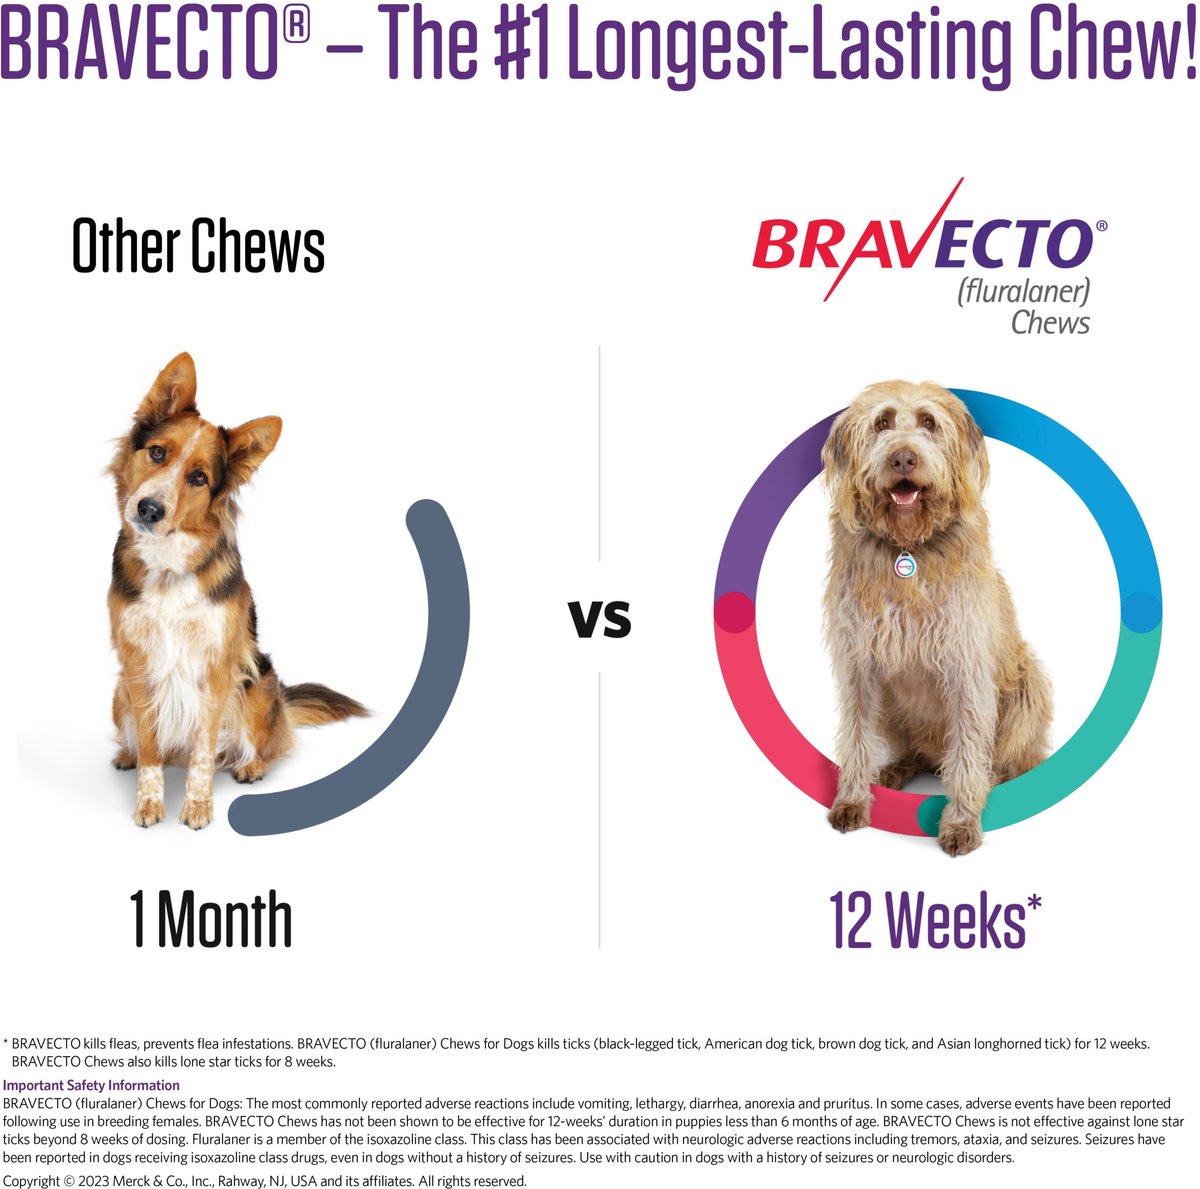 Bravecto® chewable tablets for dogs